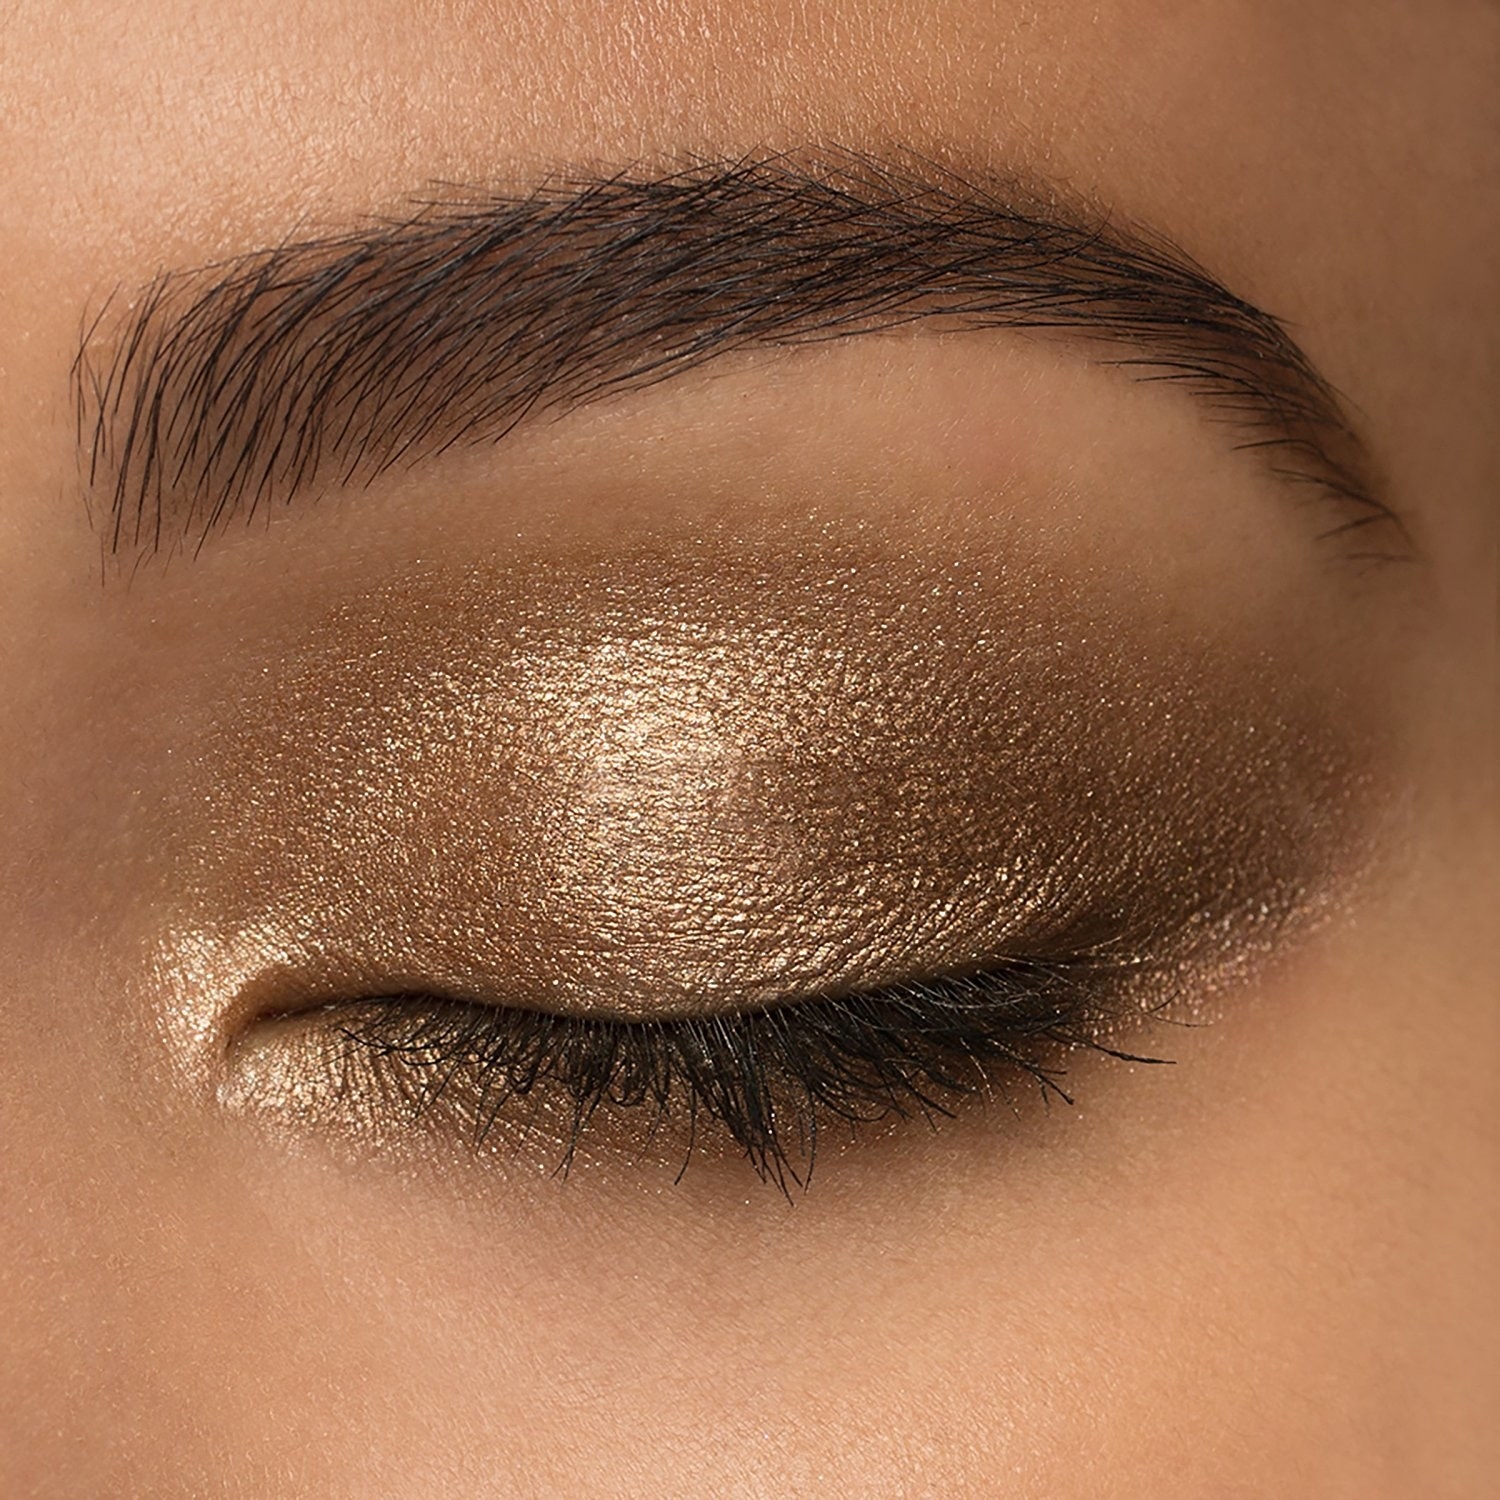 22 Useful Products To Help You Fix Your Makeup Mistakes